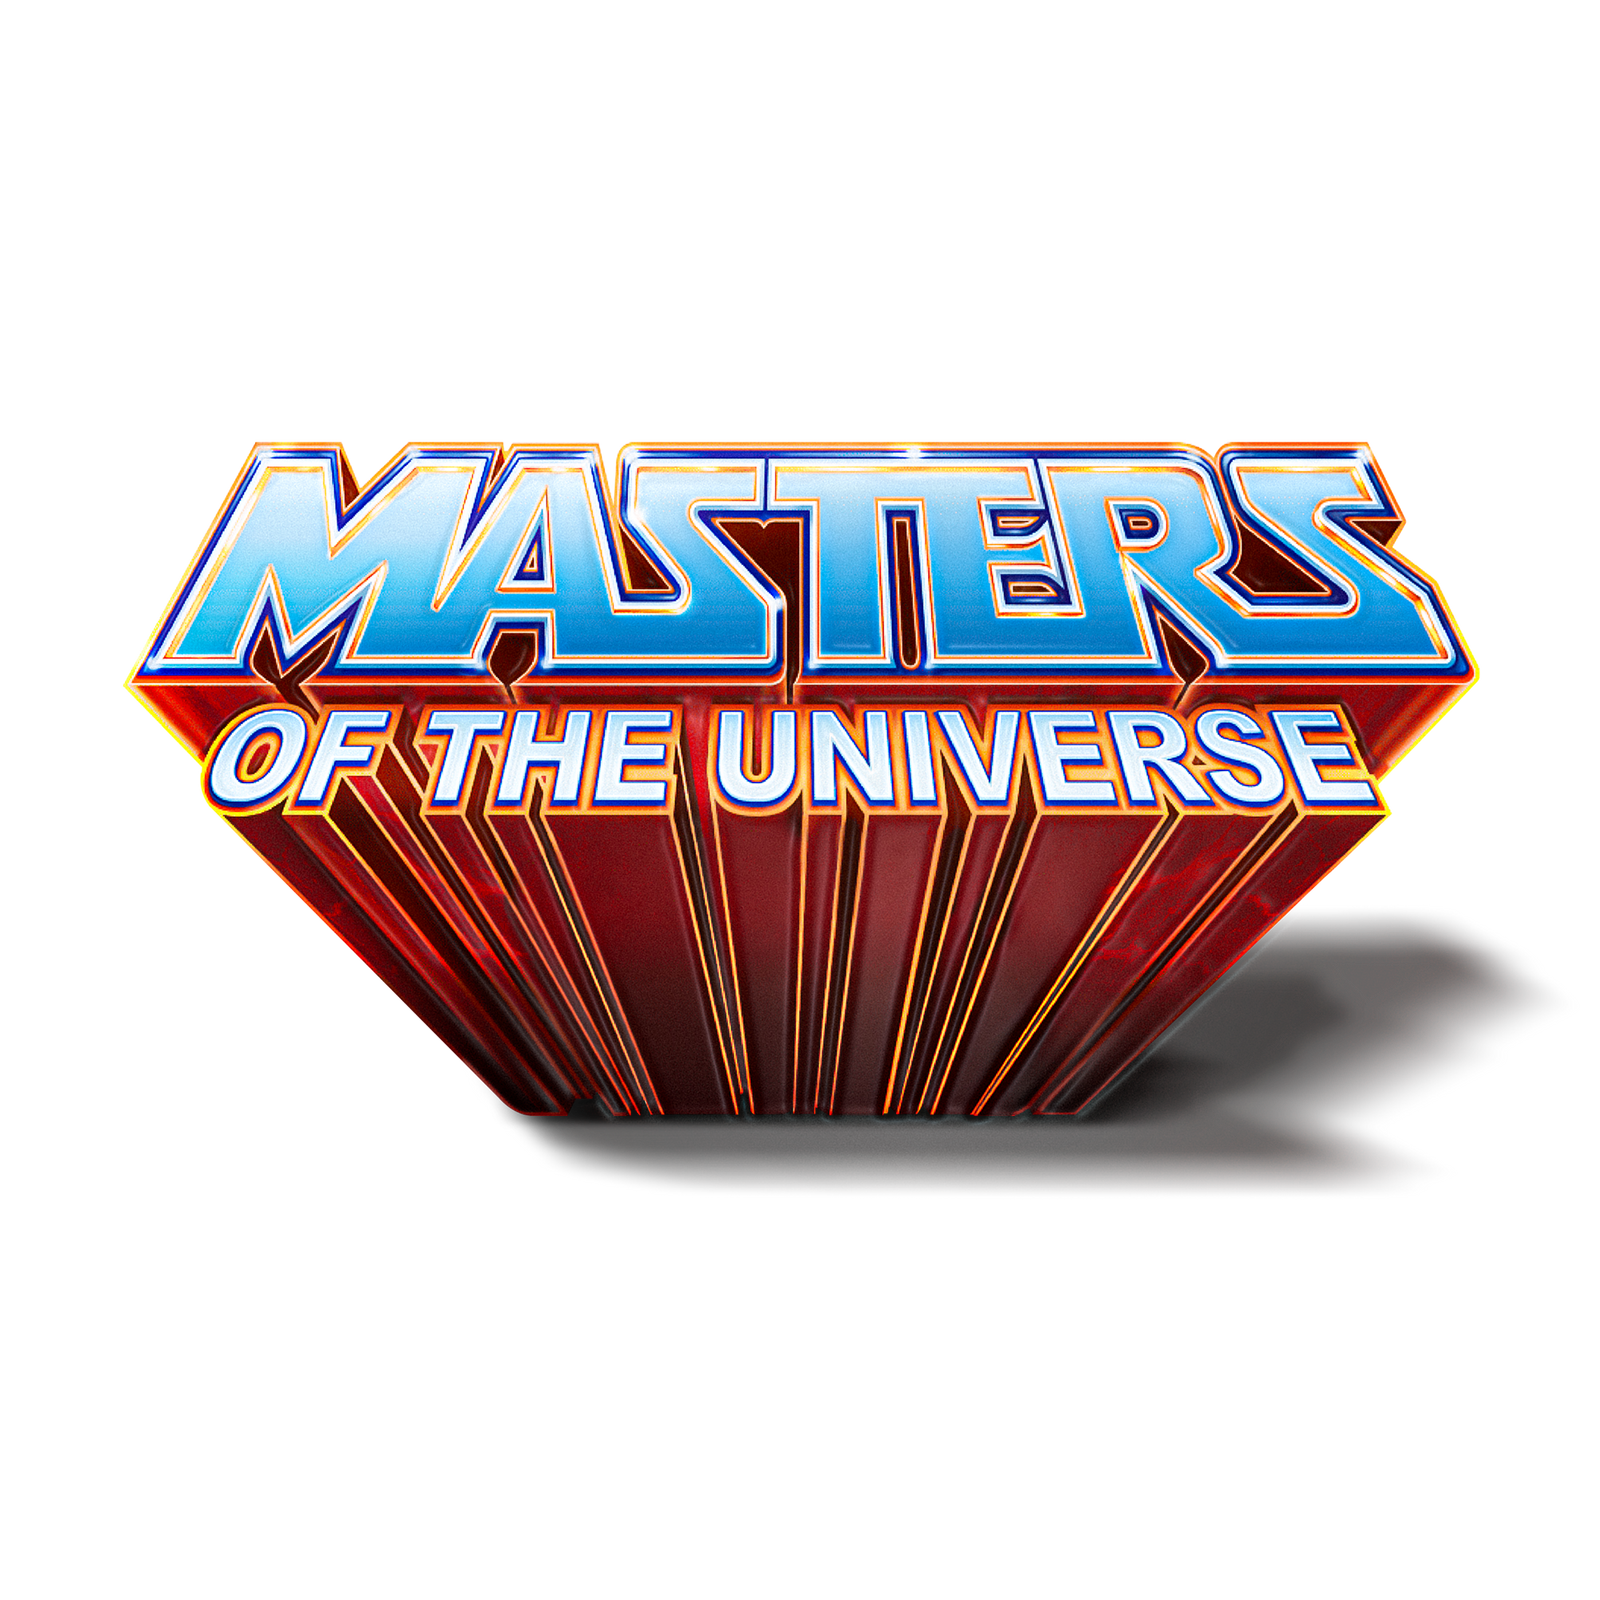 Masters of the Universe logo.